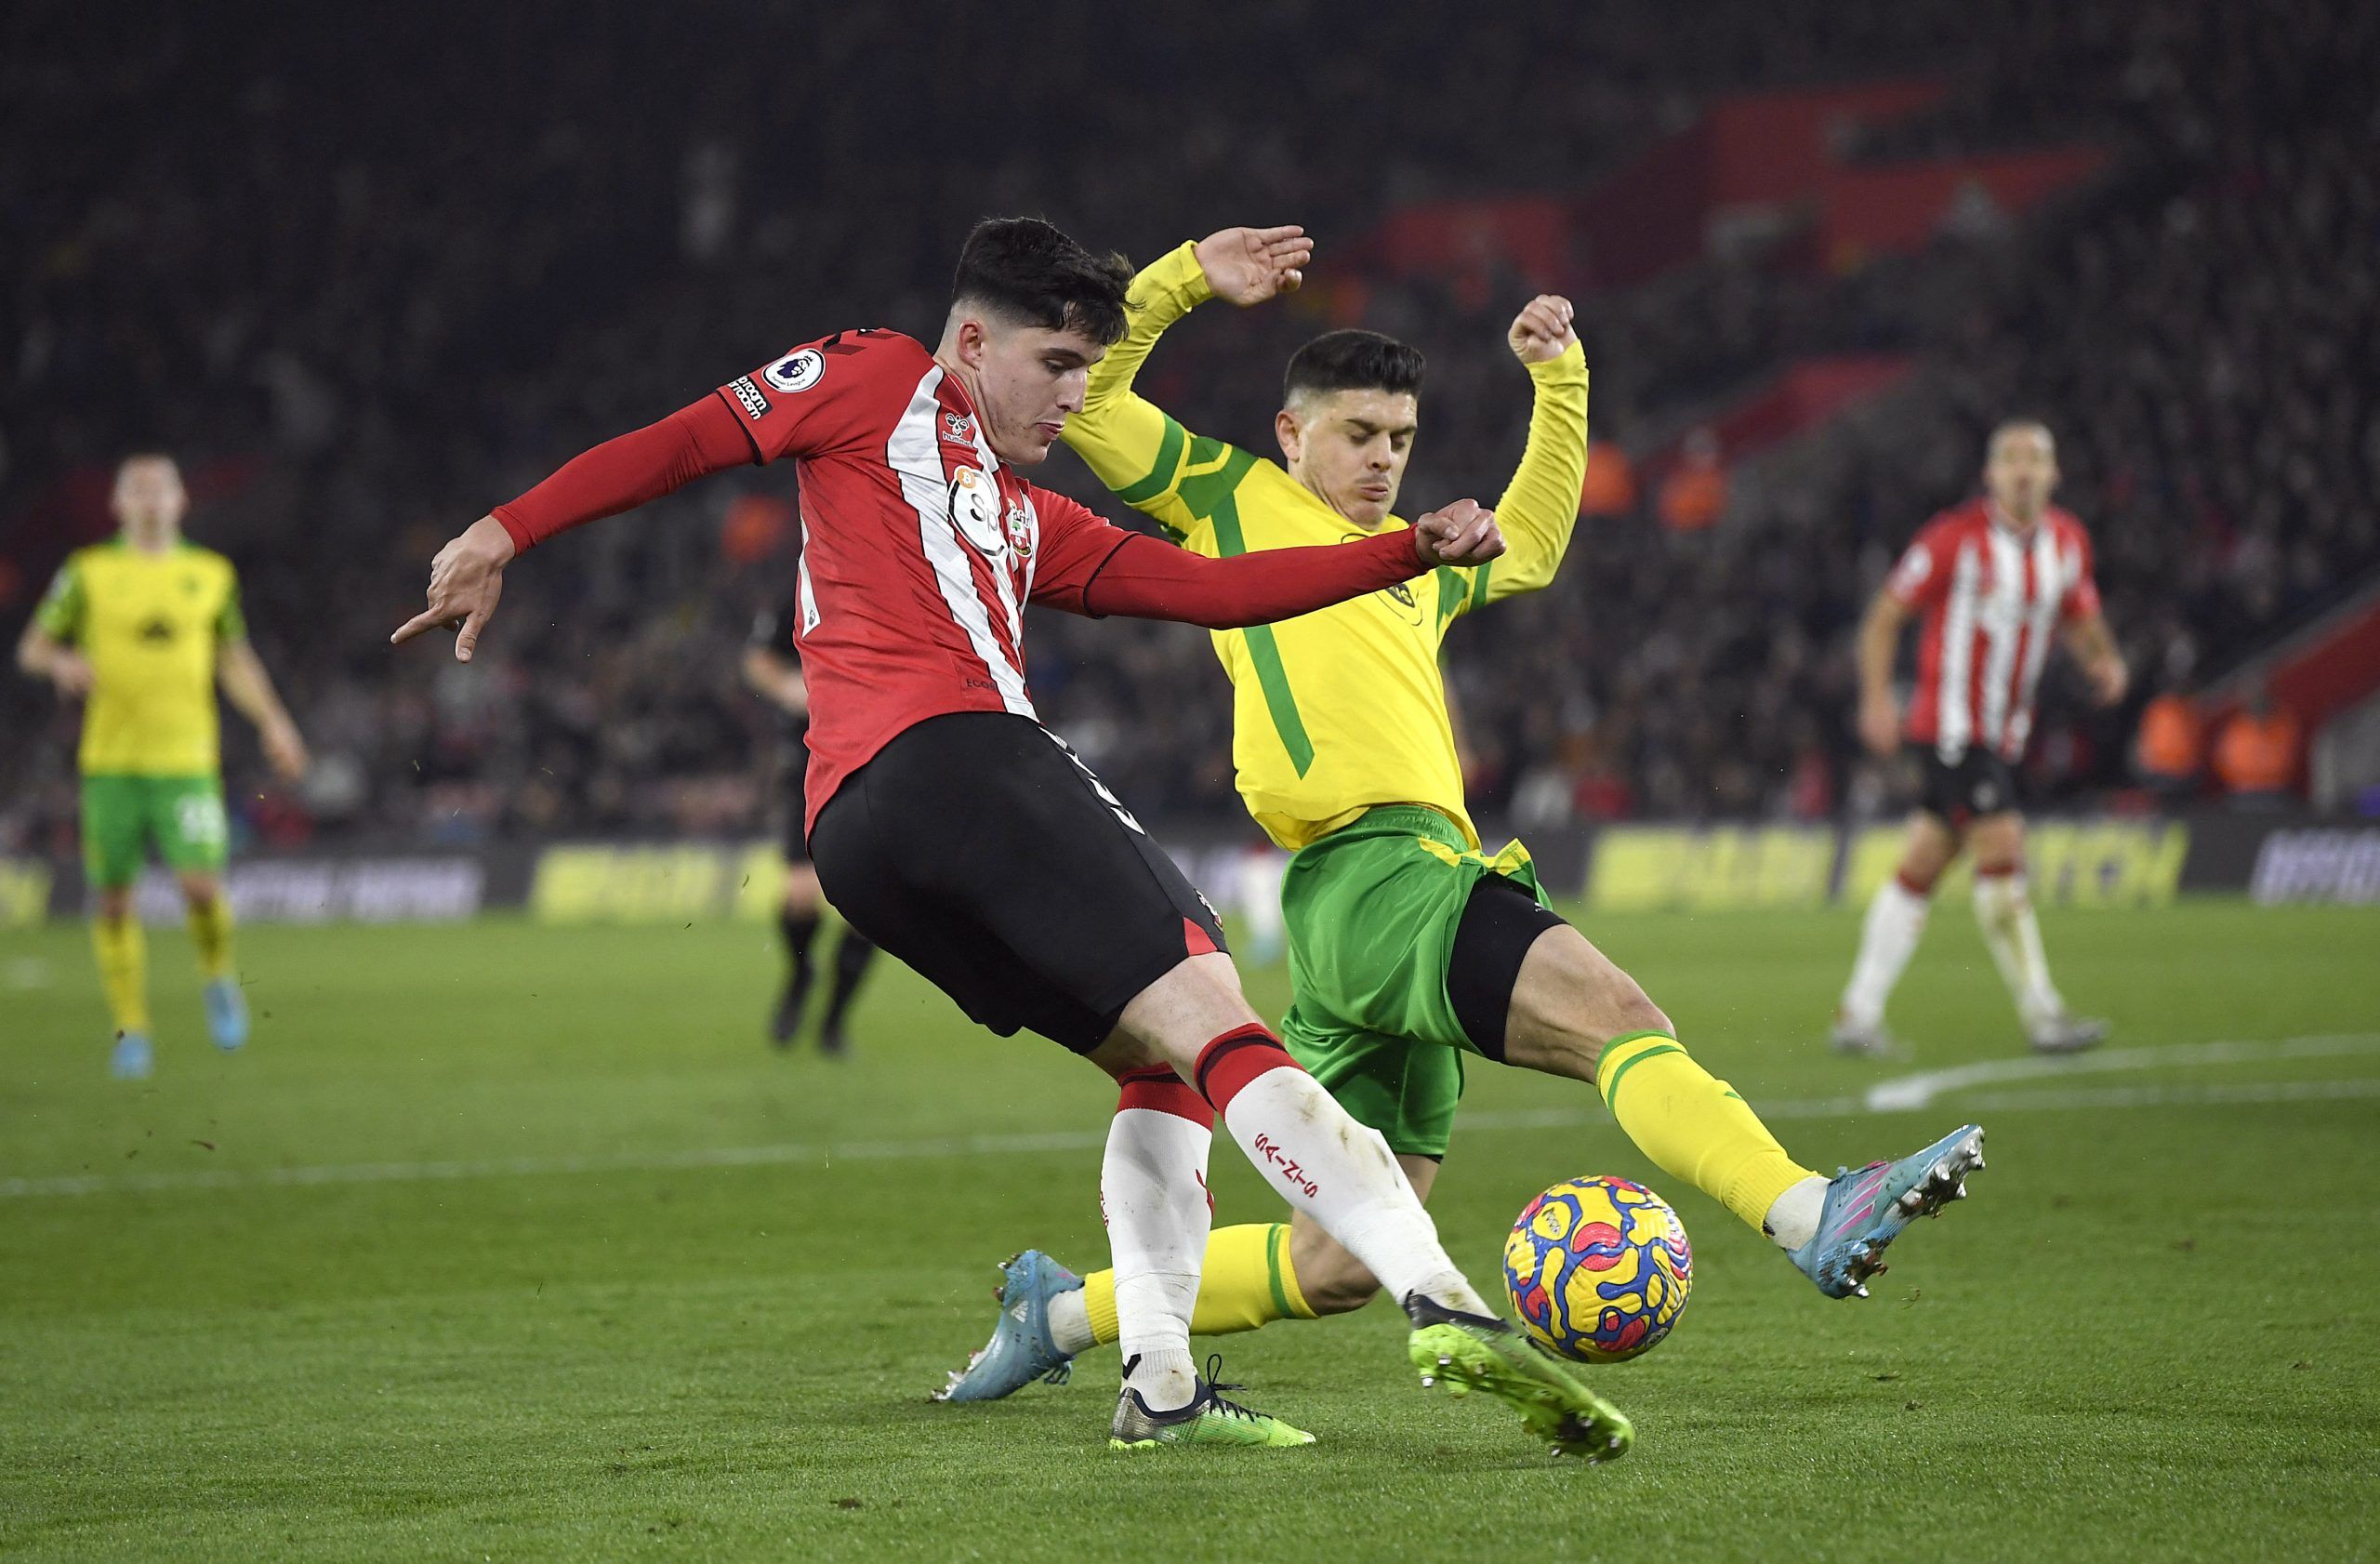 Soccer Football - Premier League - Southampton v Norwich City - St Mary's Stadium, Southampton, Britain - February 25, 2022 Southampton's Tino Livramento in action with Norwich City's Milot Rashica REUTERS/Tony Obrien EDITORIAL USE ONLY. No use with unauthorized audio, video, data, fixture lists, club/league logos or 'live' services. Online in-match use limited to 75 images, no video emulation. No use in betting, games or single club /league/player publications.  Please contact your account repr